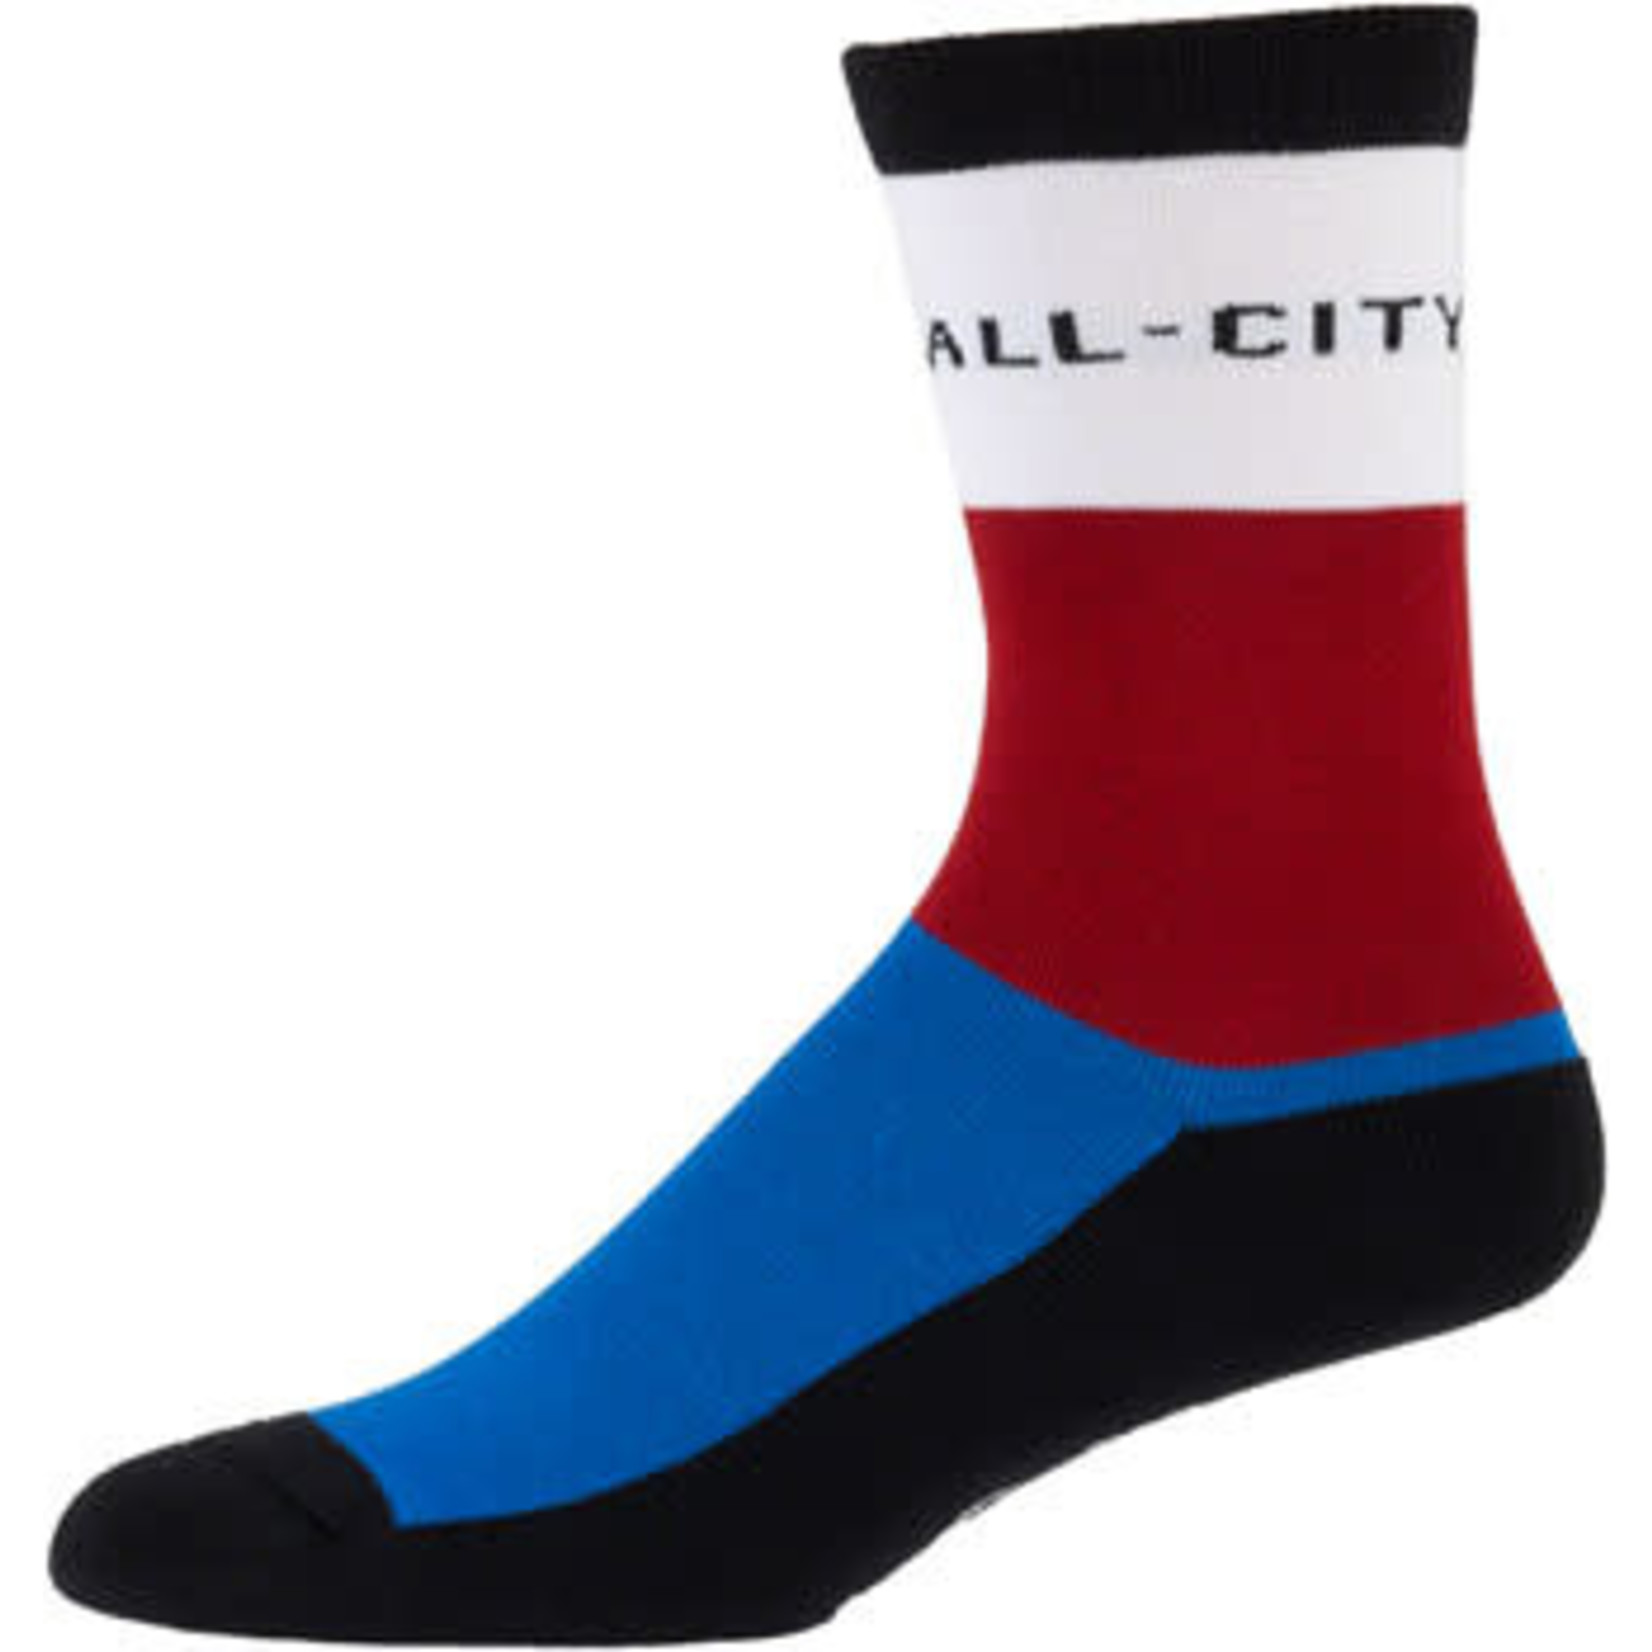 All-City All-City Parthenon Party Sock - White, Red, Blue, Black, Small/Medium